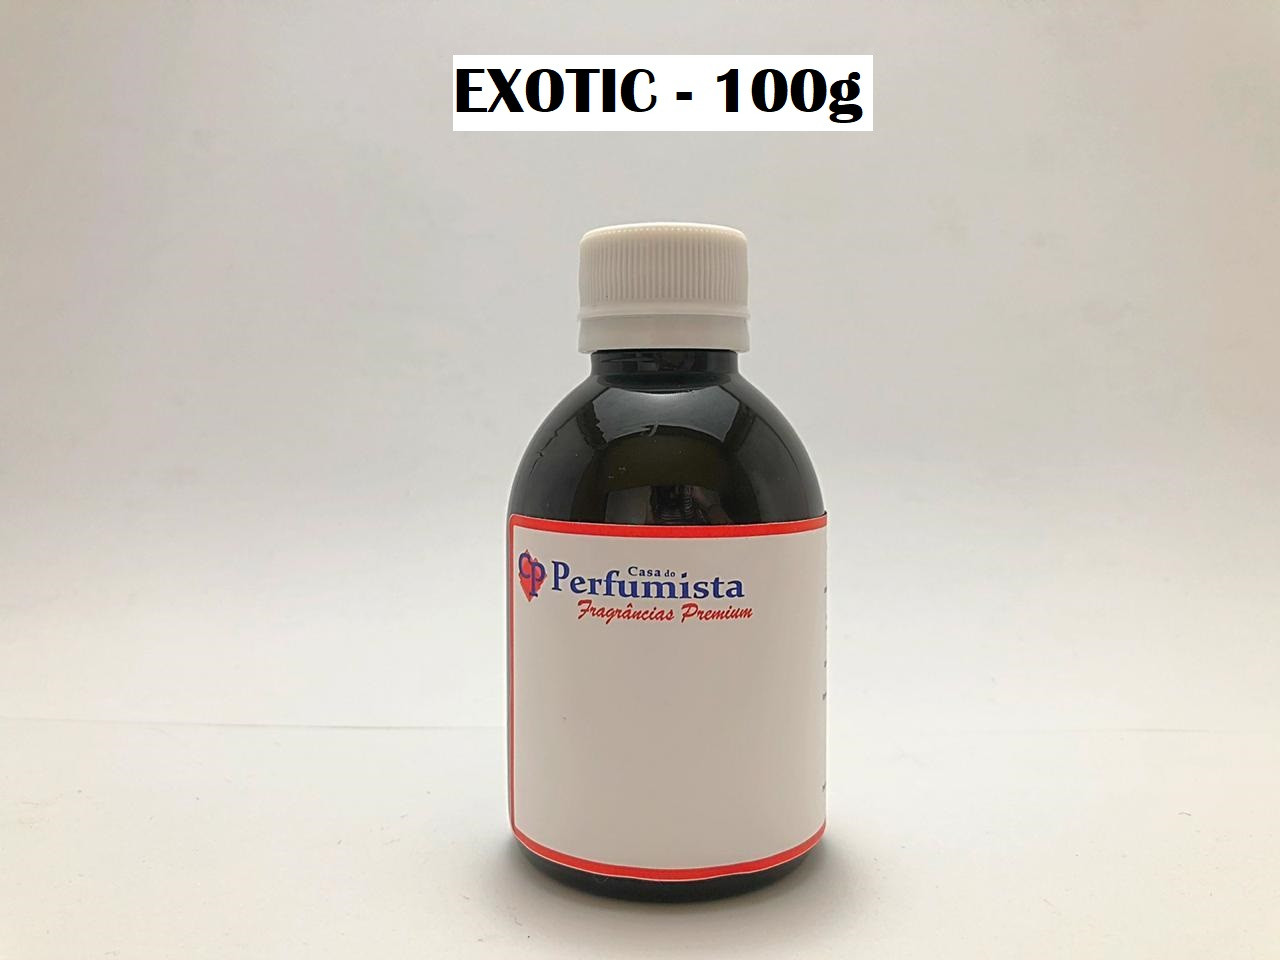 EXOTIC - 100g